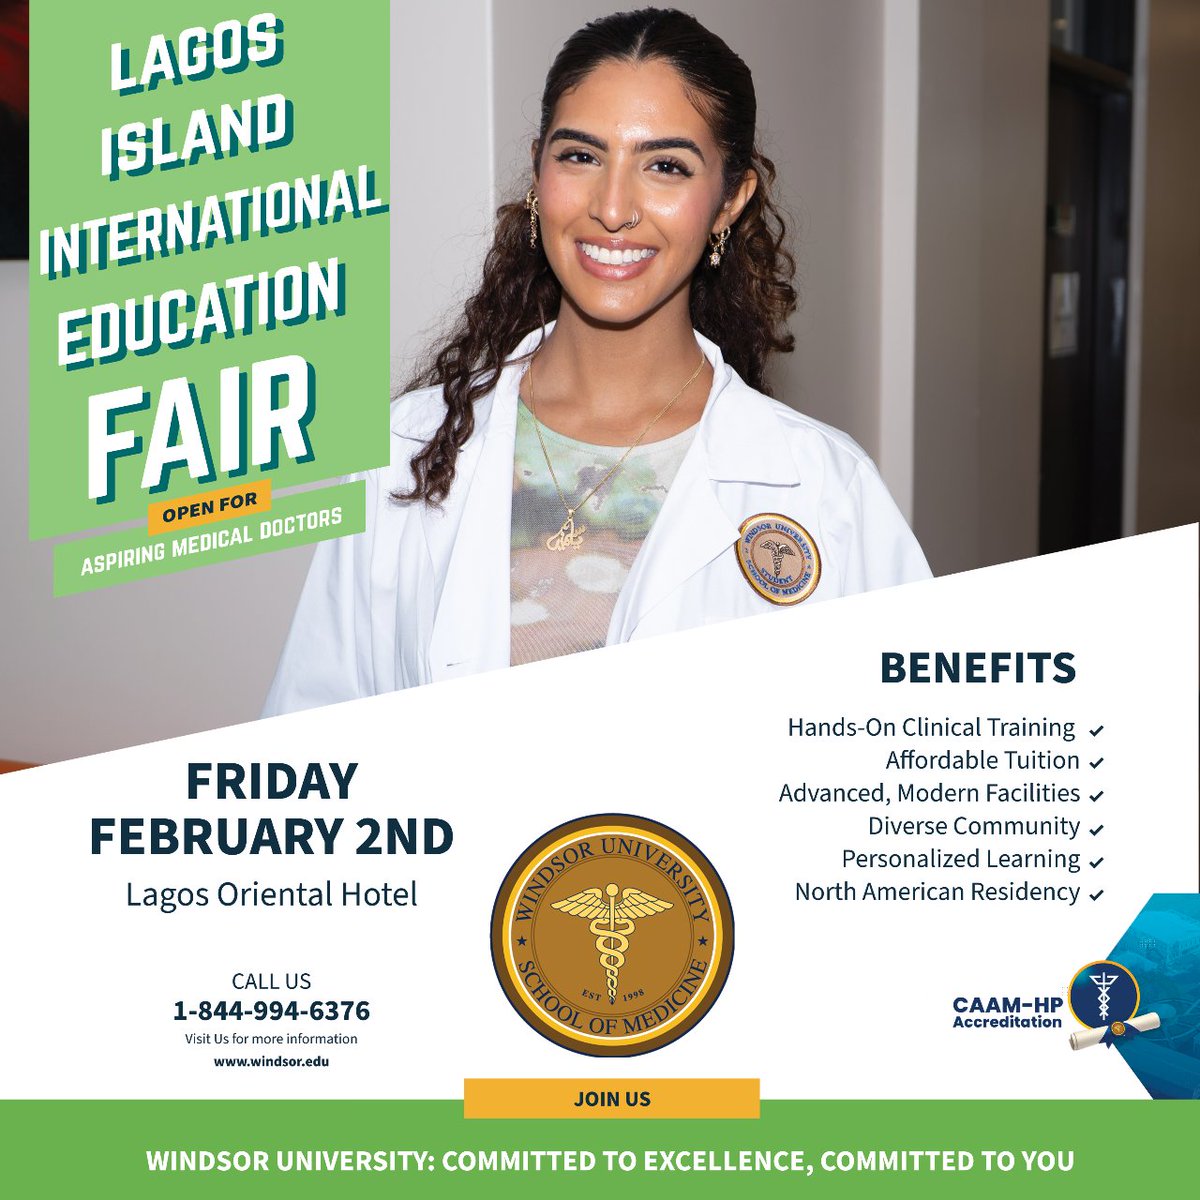 Join Us at the Lagos Island International Education Fair on February 2nd! 📚✈️ If you've ever dreamt of pursuing a career in medicine, this is your opportunity! #LagosEducationFair #WindsorMedicalSchool #CareerInMedicine #FutureDoctors #MedicalSchool